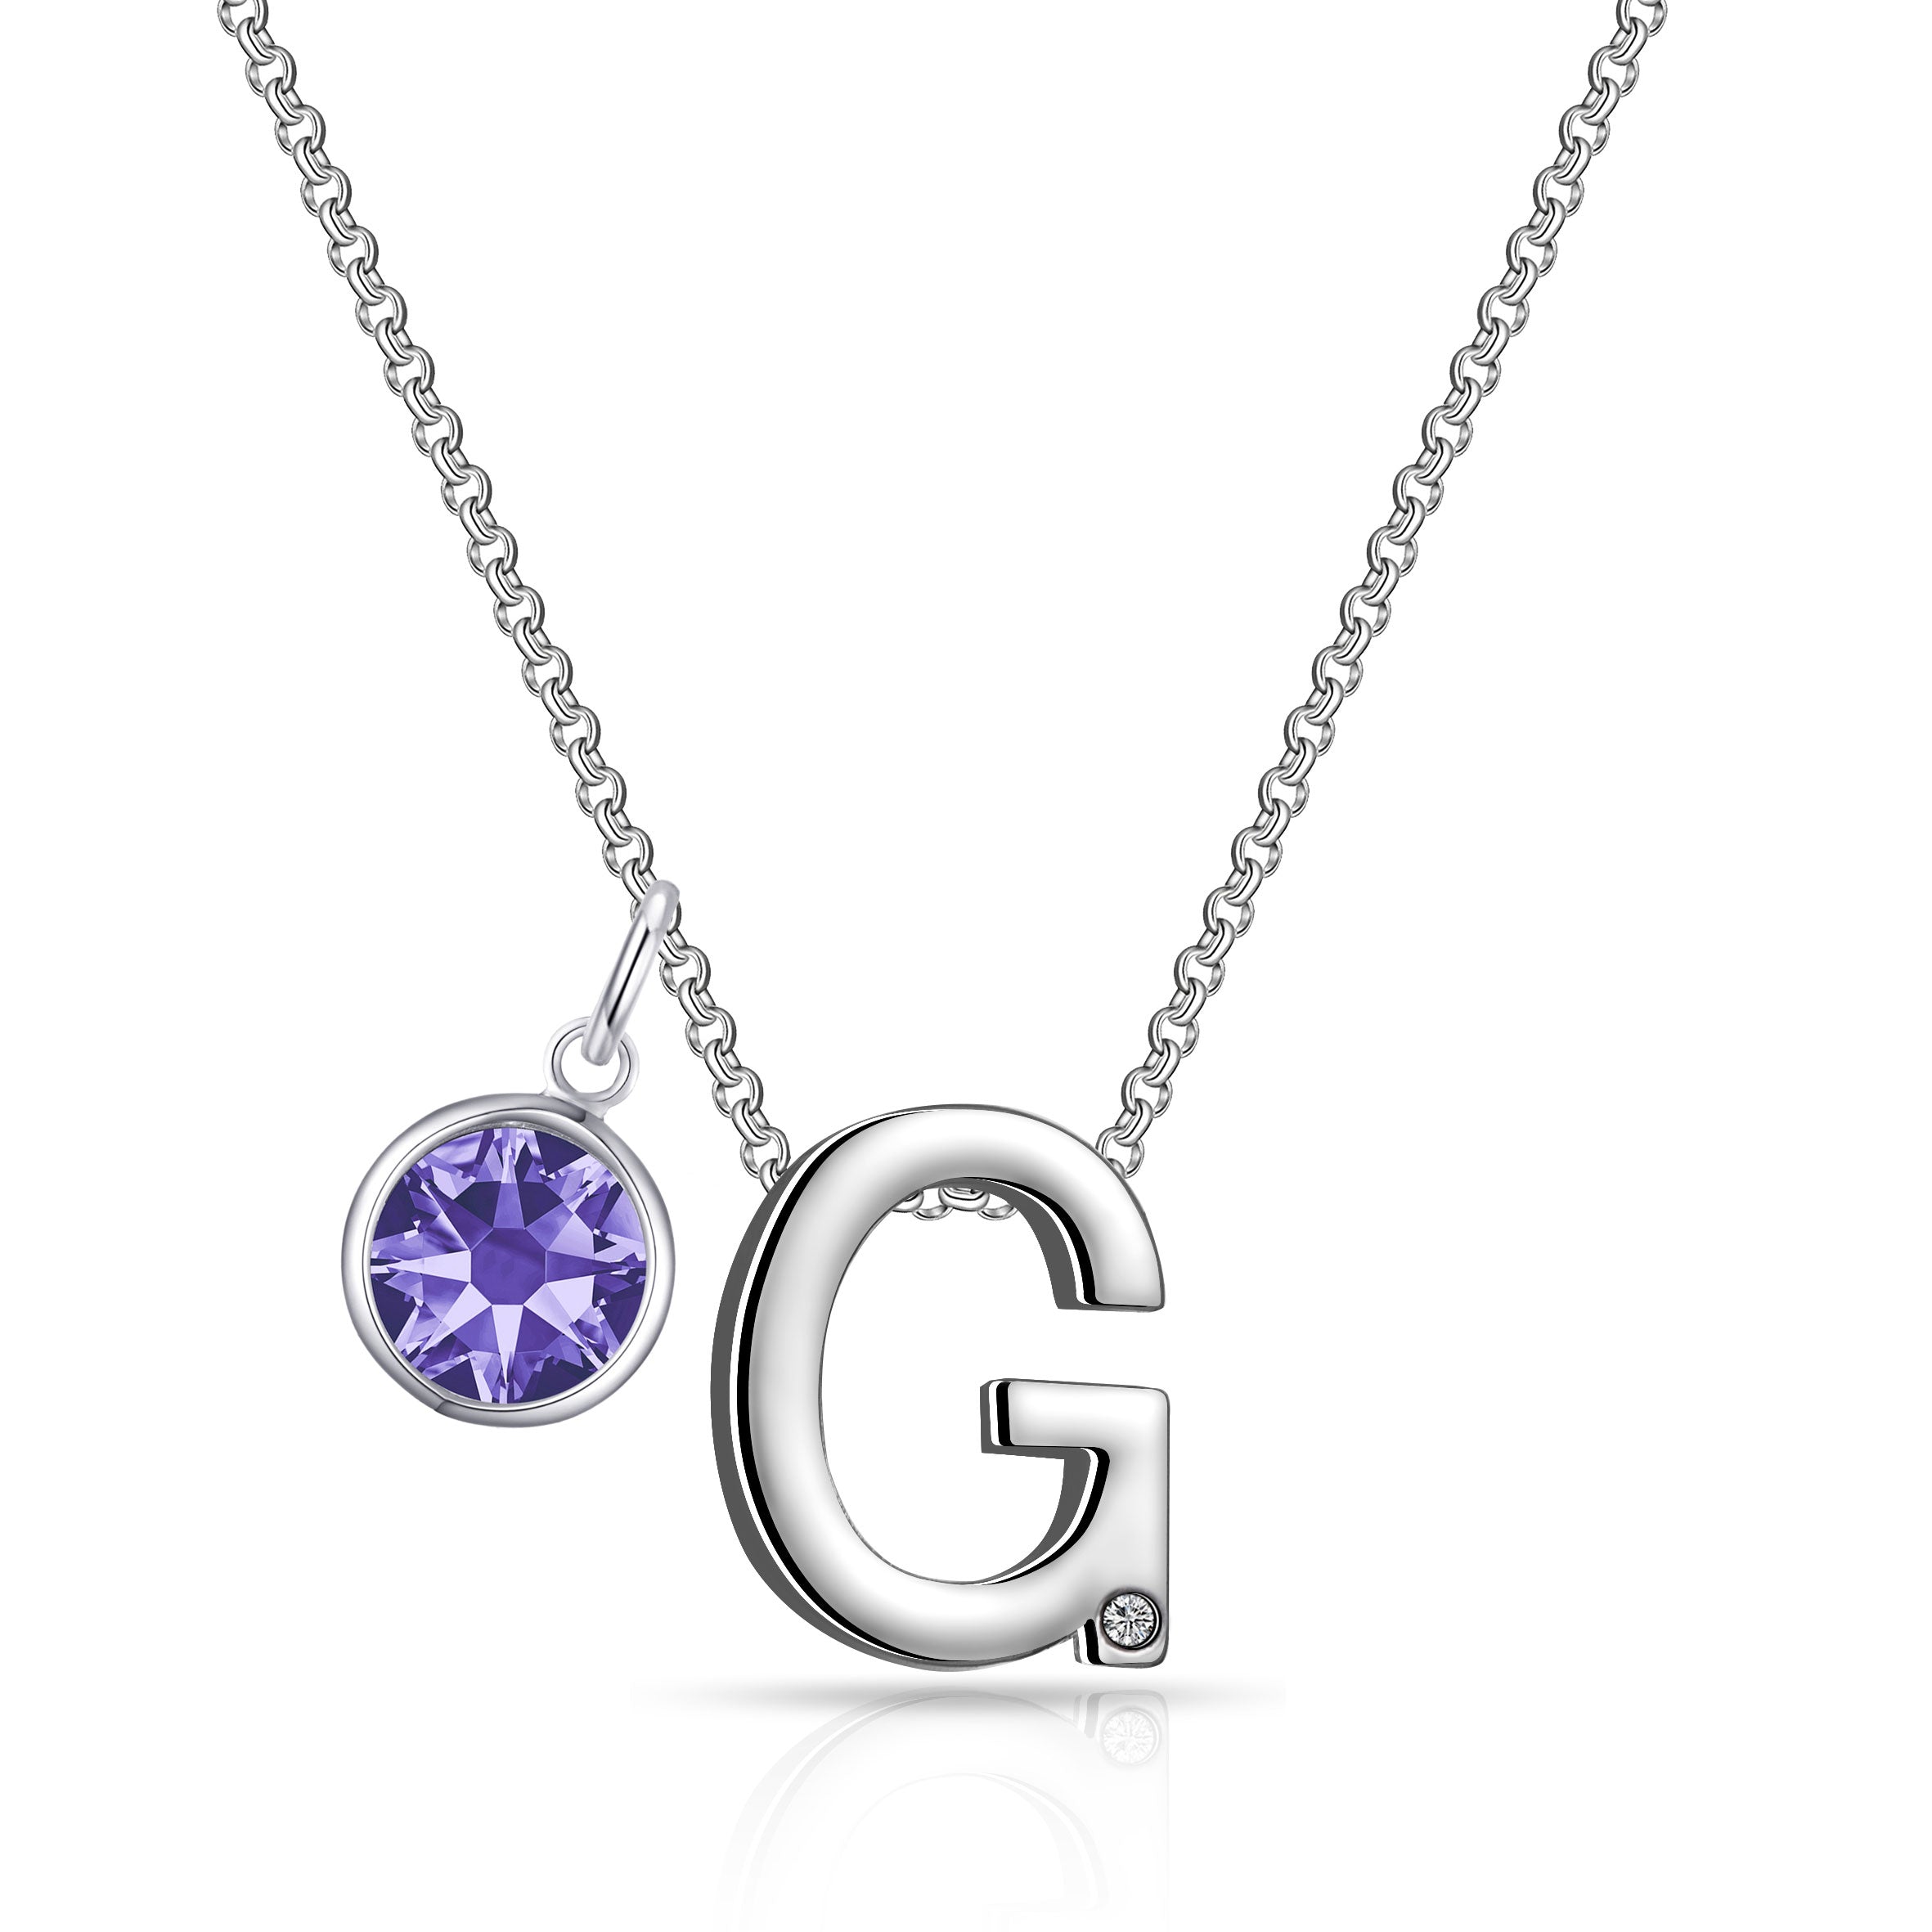 Initial G Necklace with Birthstone Charm Created with Zircondia® Crystals